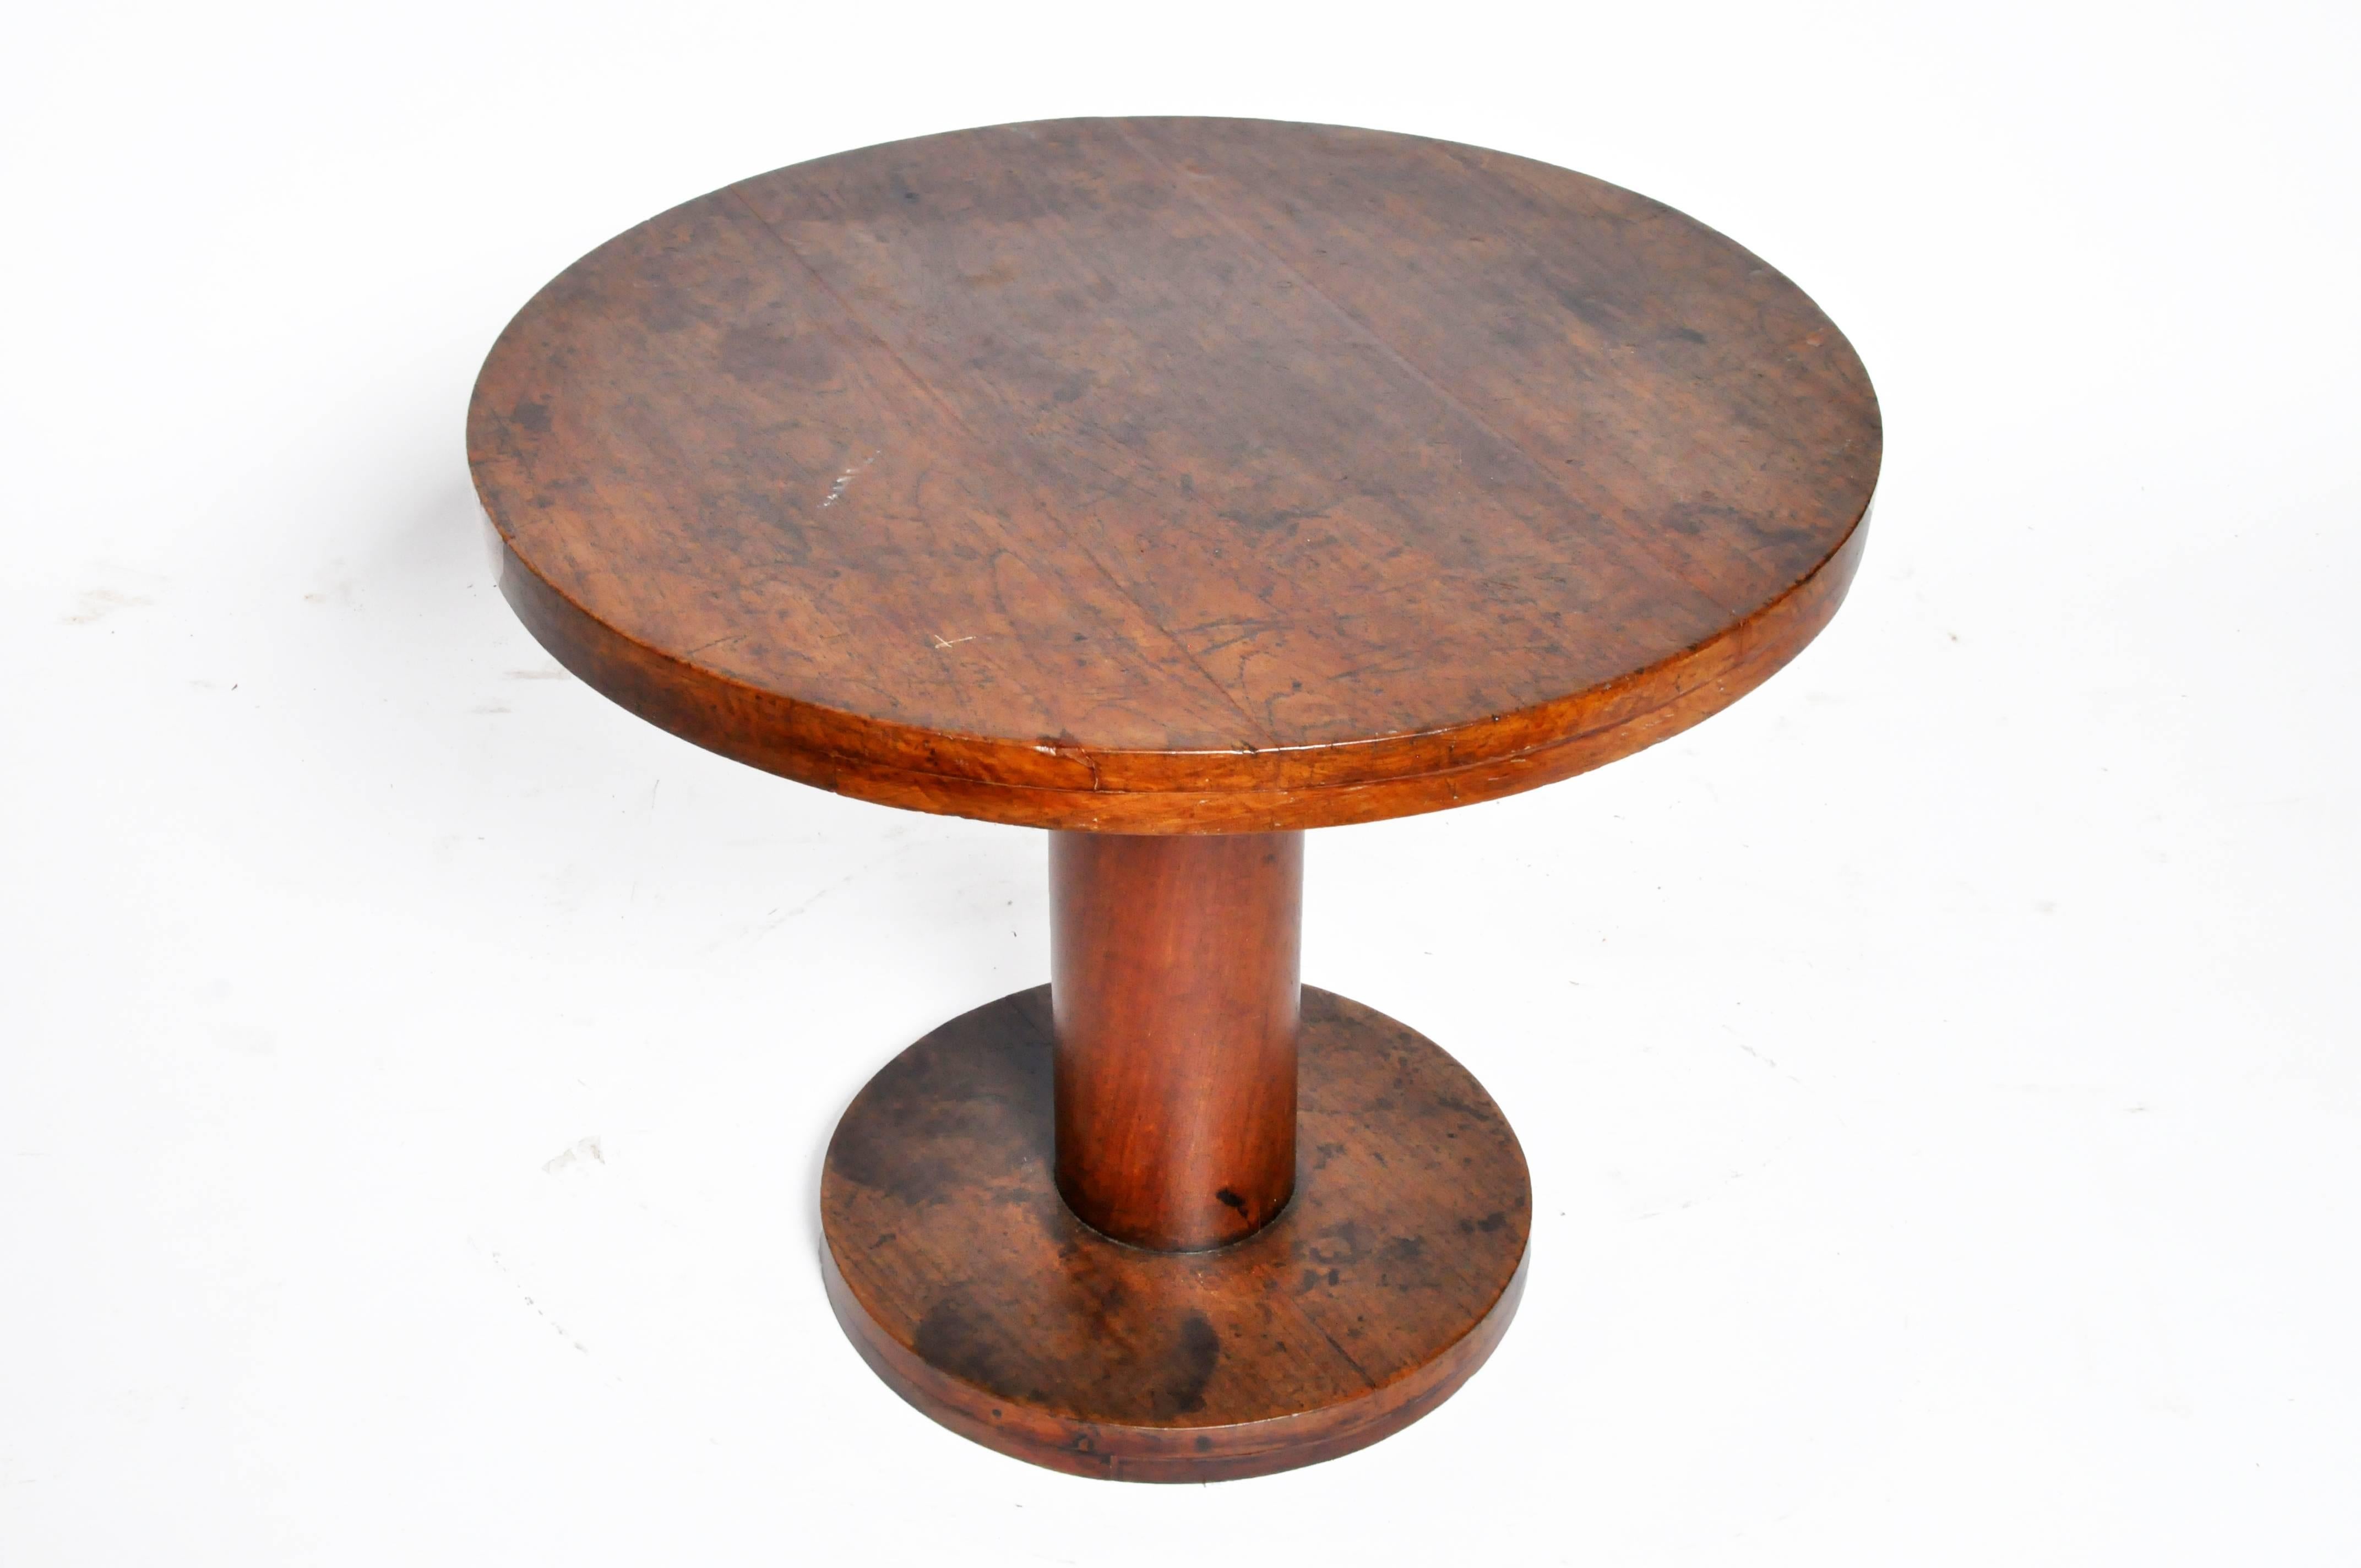 This handsome British Colonial round table is from Rangoon, Burma and was made from teak wood, circa 1950.